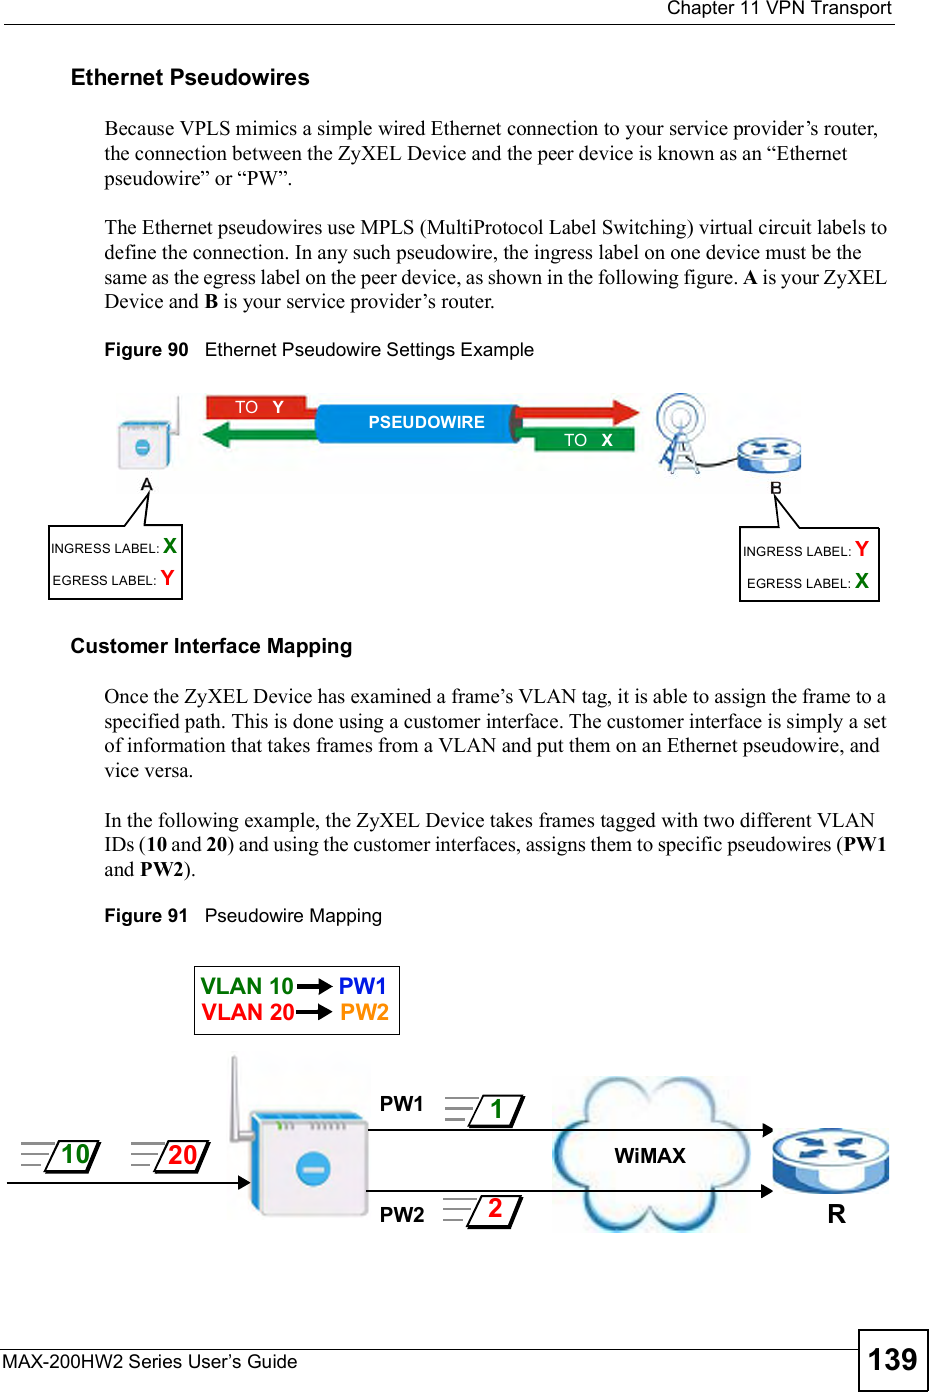  Chapter 11VPN TransportMAX-200HW2 Series User s Guide 139Ethernet PseudowiresBecause VPLS mimics a simple wired Ethernet connection to your service provider!s router, the connection between the ZyXEL Device and the peer device is known as an &quot;Ethernet pseudowire# or &quot;PW#. The Ethernet pseudowires use MPLS (MultiProtocol Label Switching) virtual circuit labels to define the connection. In any such pseudowire, the ingress label on one device must be the same as the egress label on the peer device, as shown in the following figure. A is your ZyXEL Device and B is your service provider!s router.Figure 90   Ethernet Pseudowire Settings Example  Customer Interface MappingOnce the ZyXEL Device has examined a frame!s VLAN tag, it is able to assign the frame to a specified path. This is done using a customer interface. The customer interface is simply a set of information that takes frames from a VLAN and put them on an Ethernet pseudowire, and vice versa.In the following example, the ZyXEL Device takes frames tagged with two different VLAN IDs (10 and 20) and using the customer interfaces, assigns them to specific pseudowires (PW1and PW2).Figure 91   Pseudowire MappingINGRESS LABEL: XEGRESS LABEL: YINGRESS LABEL: YEGRESS LABEL: XPSEUDOWIRETO   YTO   XVLAN 10 PW1VLAN 20 PW210 20PW1PW212WiMAXR